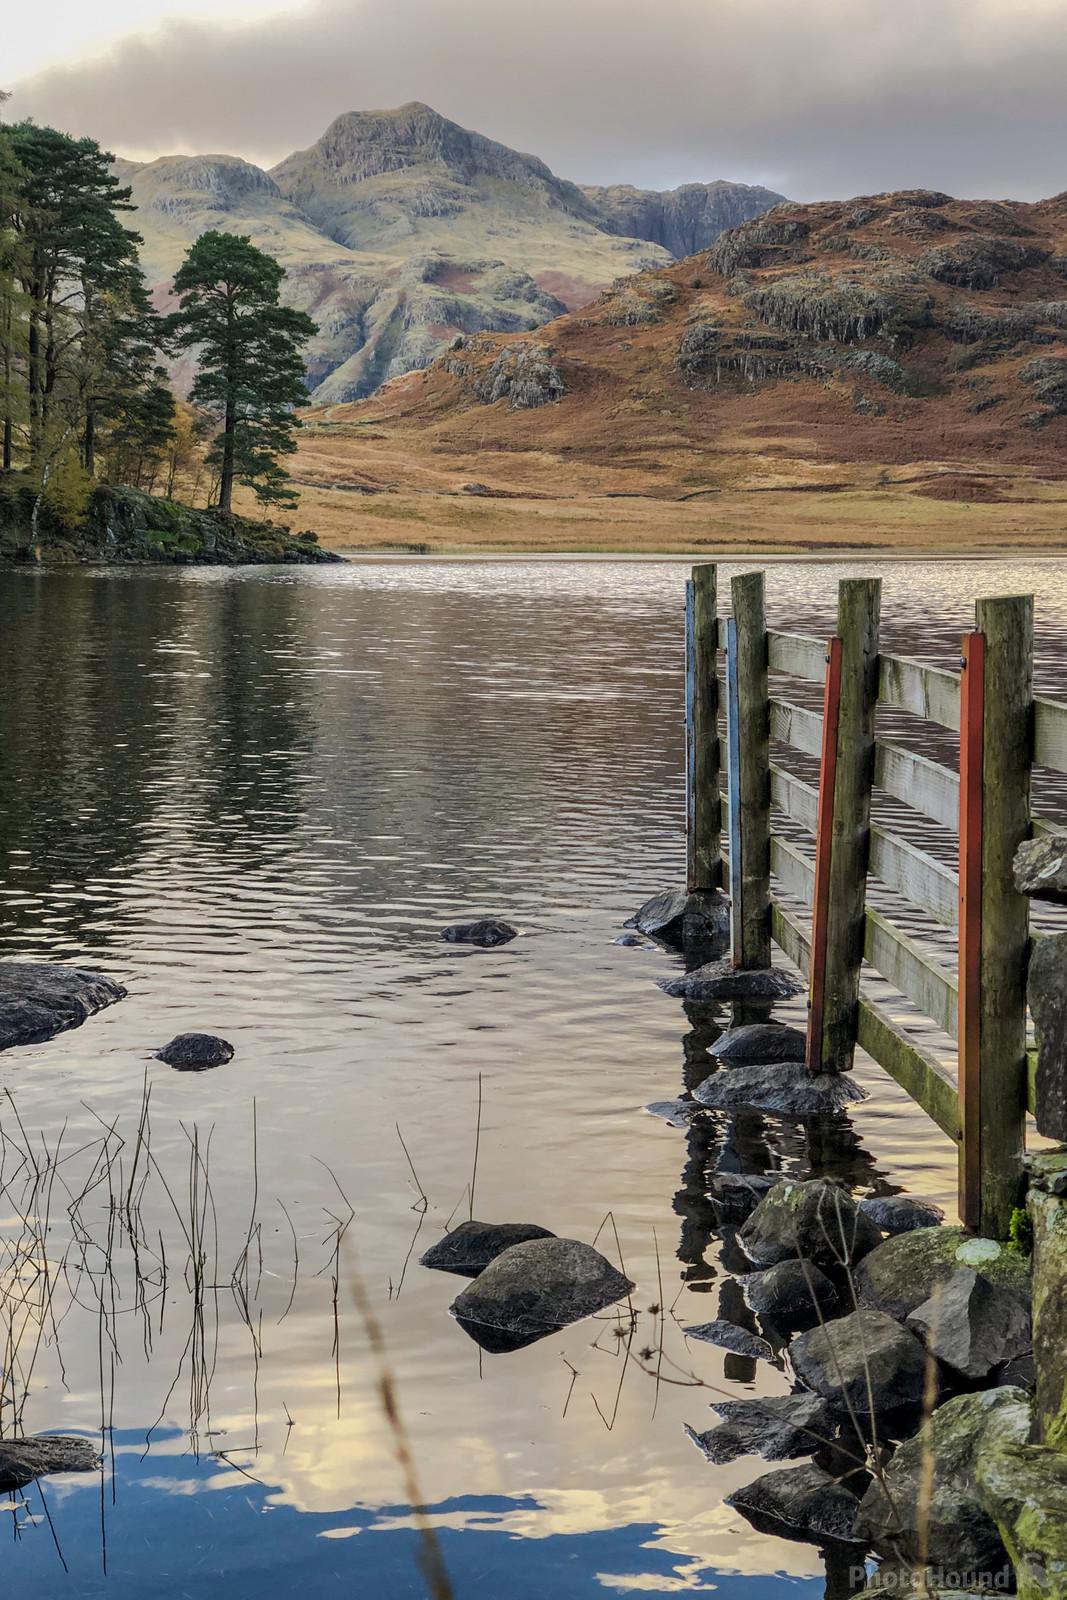 Image of Blea Tarn, Lake District by David Culley